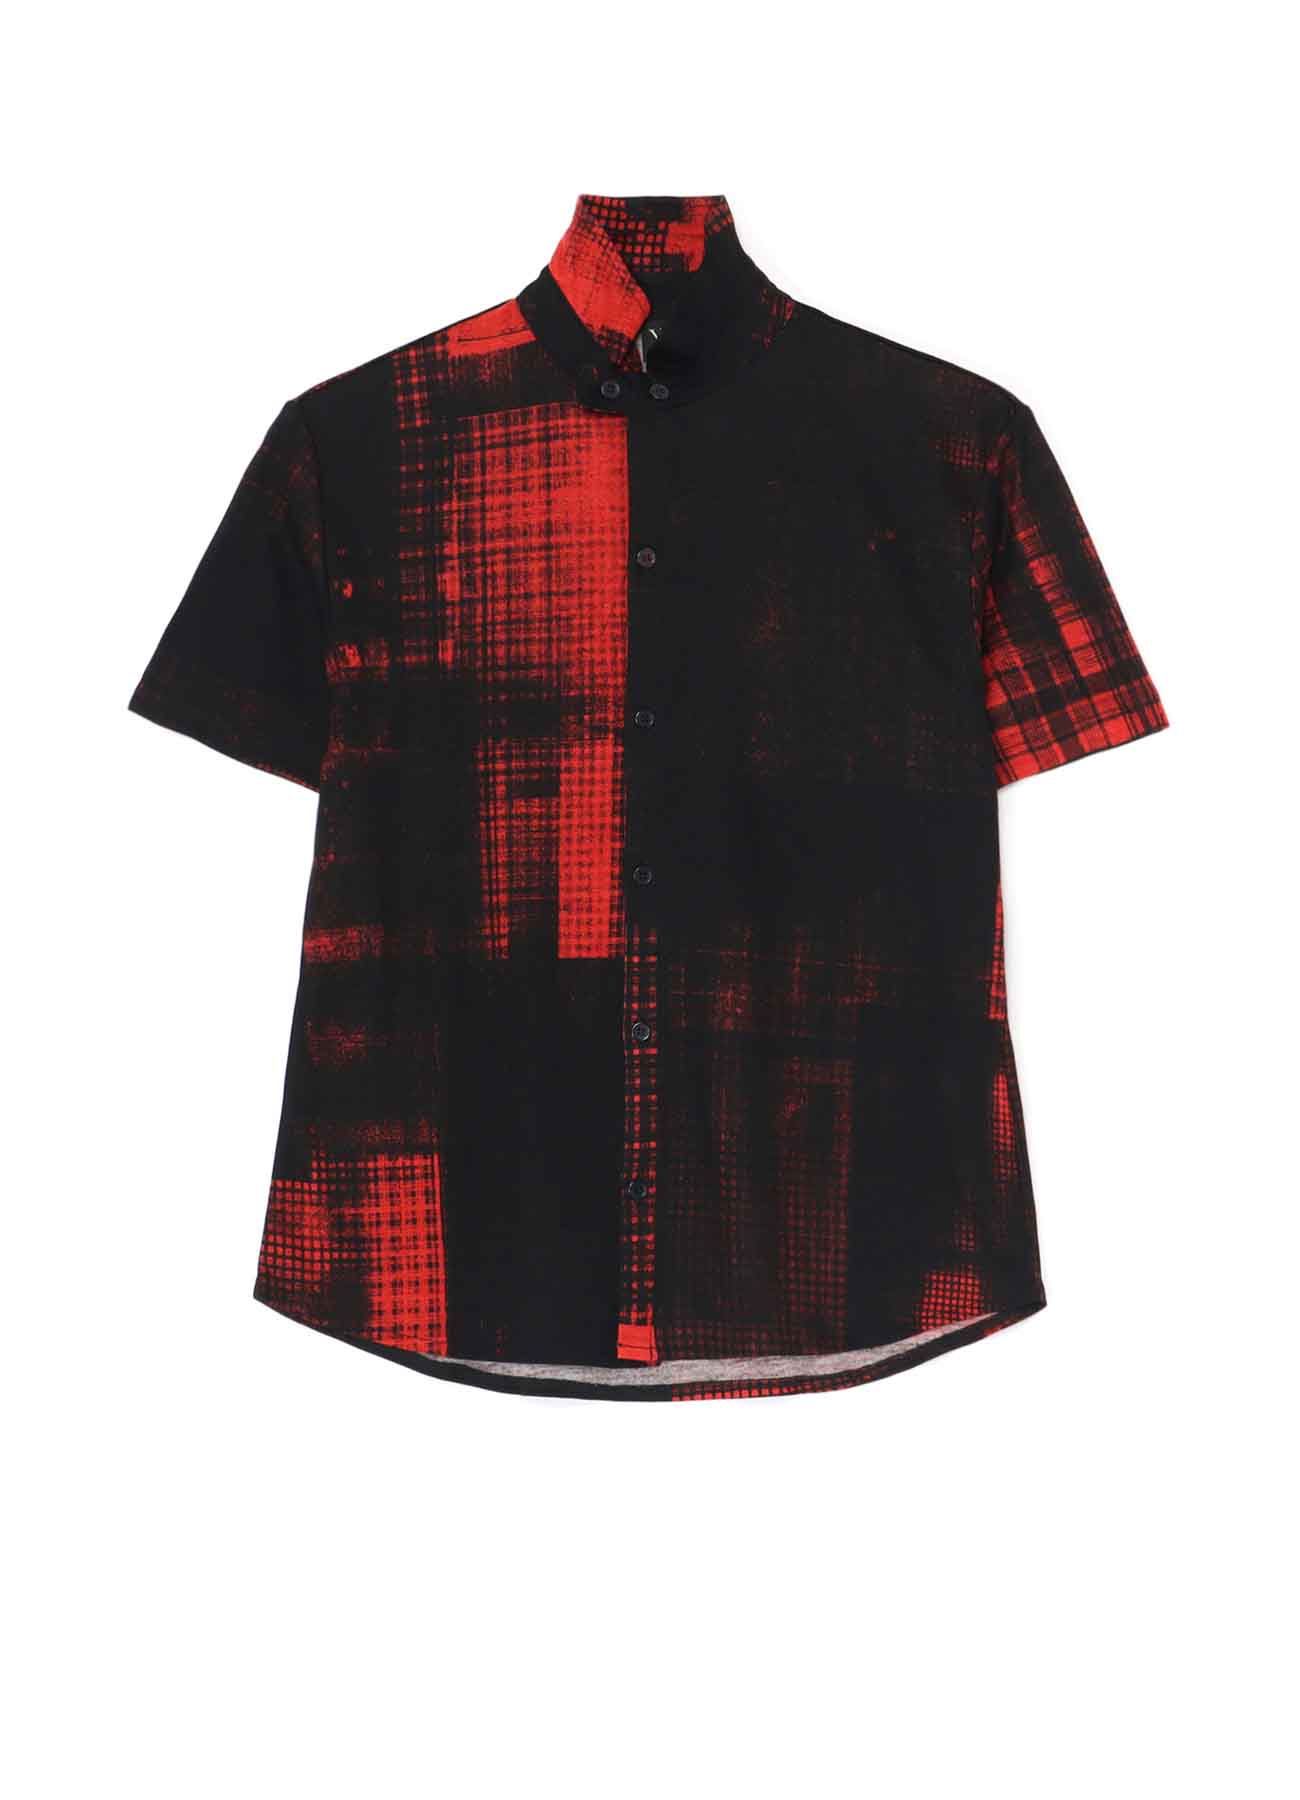 CHECKED PRINT ROUND COLLER HARF SLEEVE SHIRT